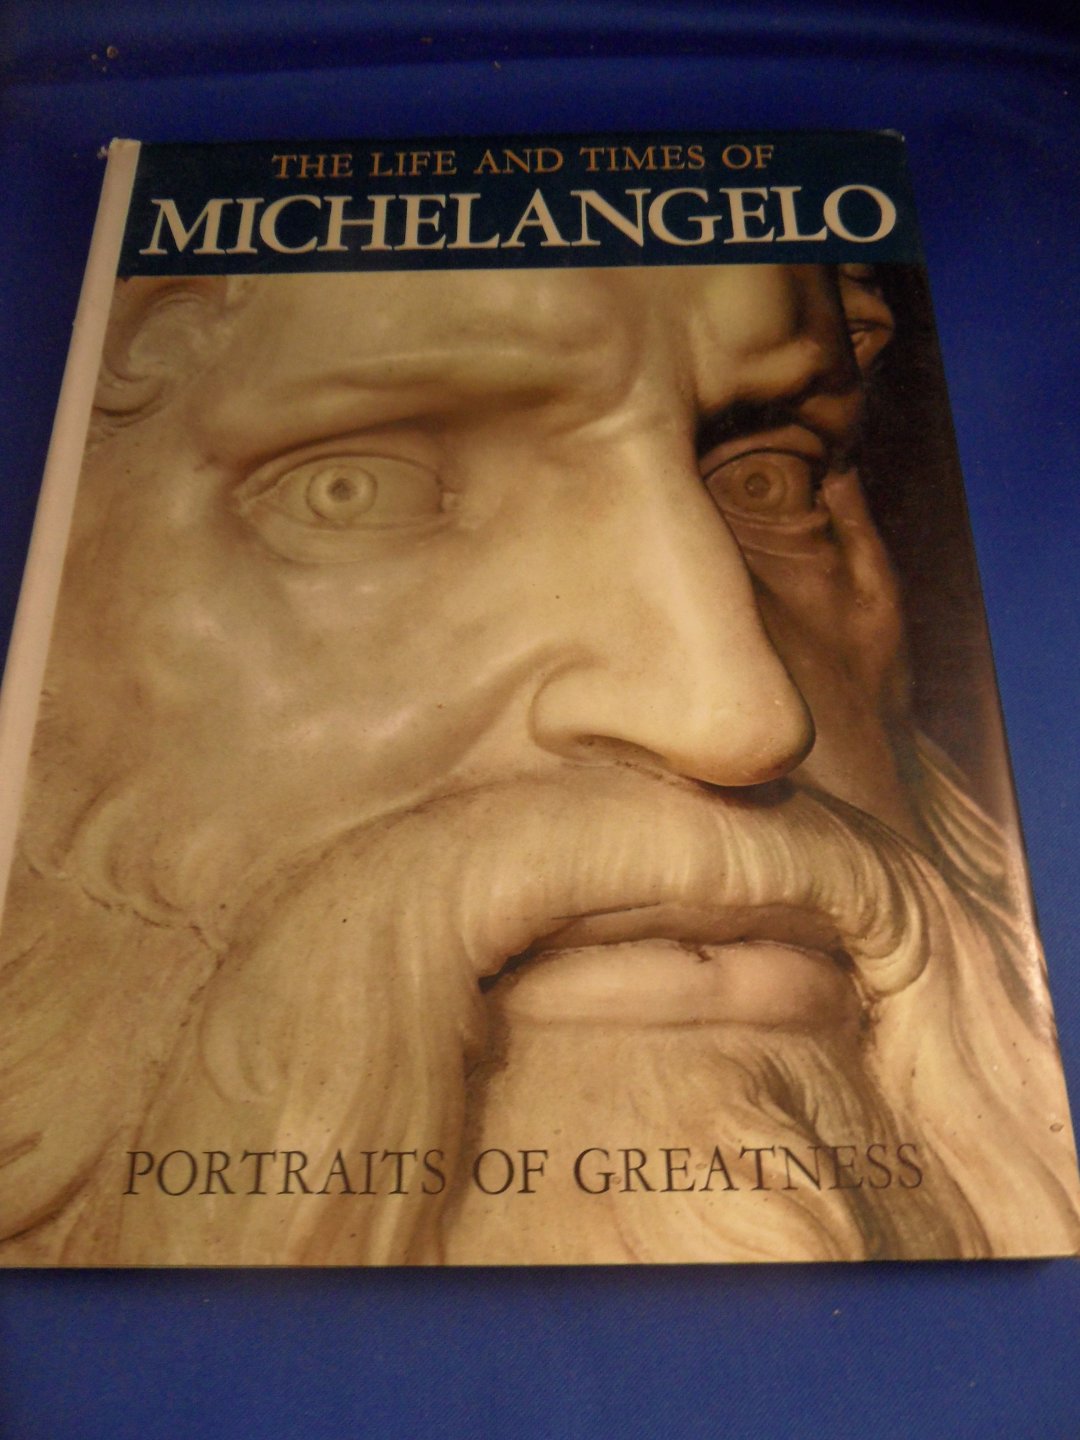 Orlandi, Enzo - The life and times of Michelangelo